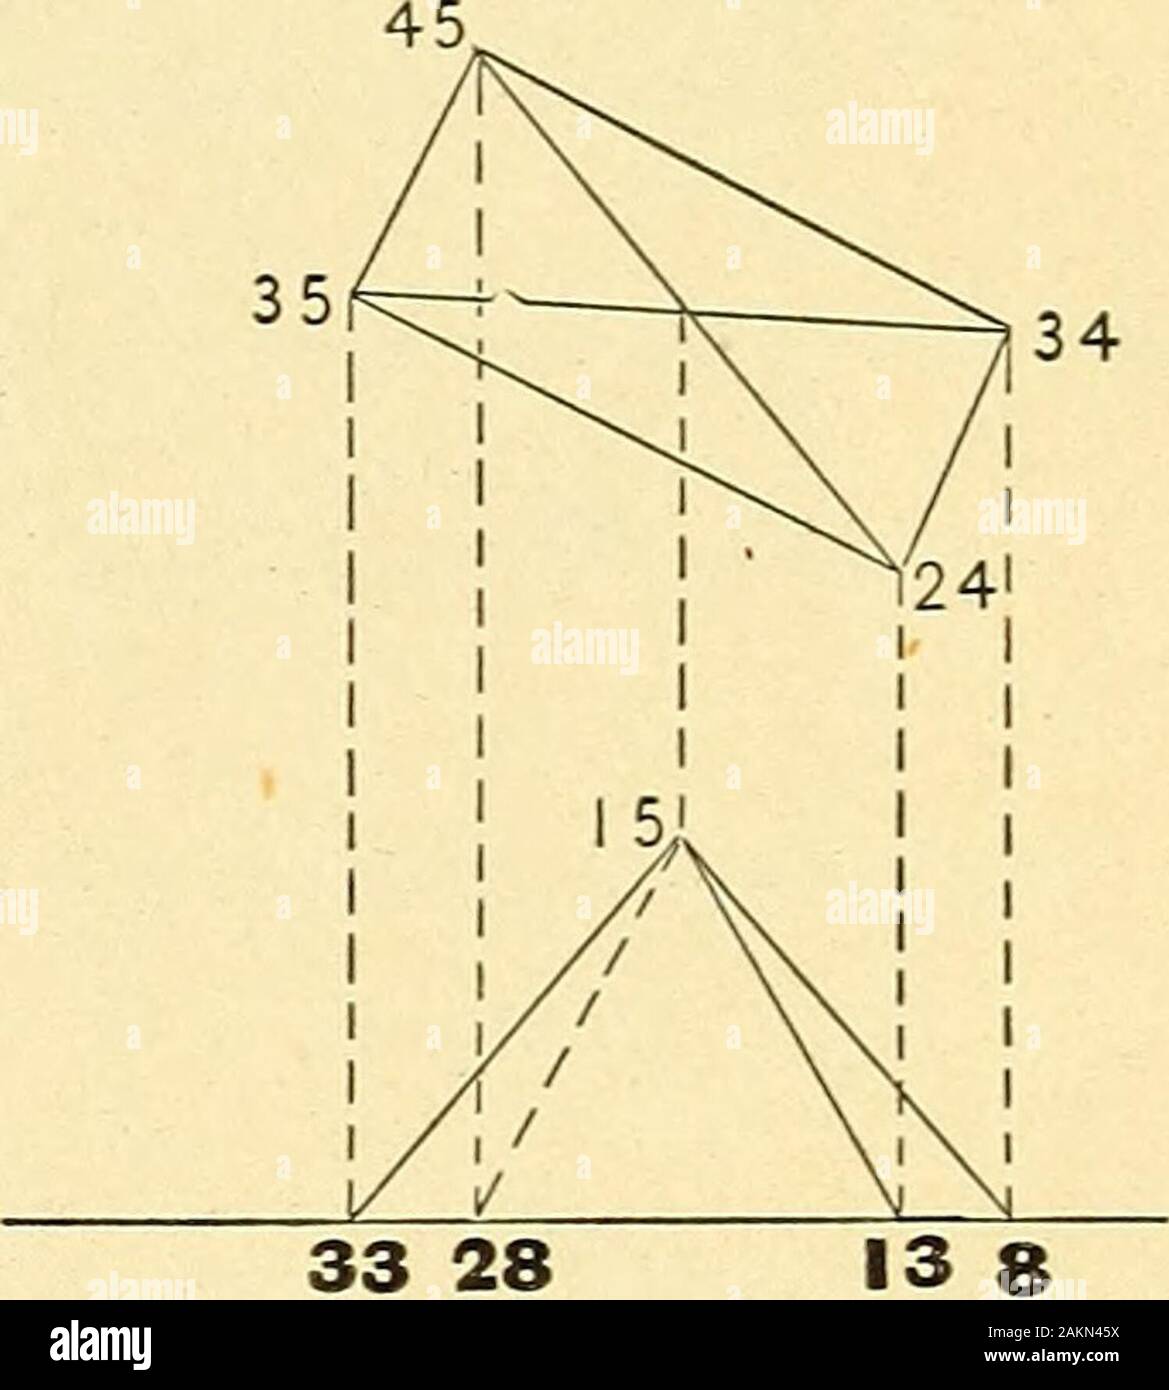 Descriptive geometry . 33 28 Problems 1-4. Determine the true size of the diedral angle between planes N and T. (Arts. 83-85Problems 5-8. Determine the true sizes of the diedral angles of the objects. (Arts. 83-85, pages pages, 57,57, 58.) Unit of measure, J inch. Space required for each problem, 2^ x 3 inches. Angles between GL and traces of p| A-fC 1Qplanes, multiples of 15°. Measurements from GL, in light type, and from right-hand division line, in heavy type. »-A It. 1 O l4 2 8 4 ^-^ ^^ J^^ 7 6 12/ 6 12/^ ^ 78 . 8 /16/ / ^y^ ^^ S 9 vs . 10 11 I^S , 12 HS ^^ c * 0 //S ^ 1 Determine the an Stock Photo